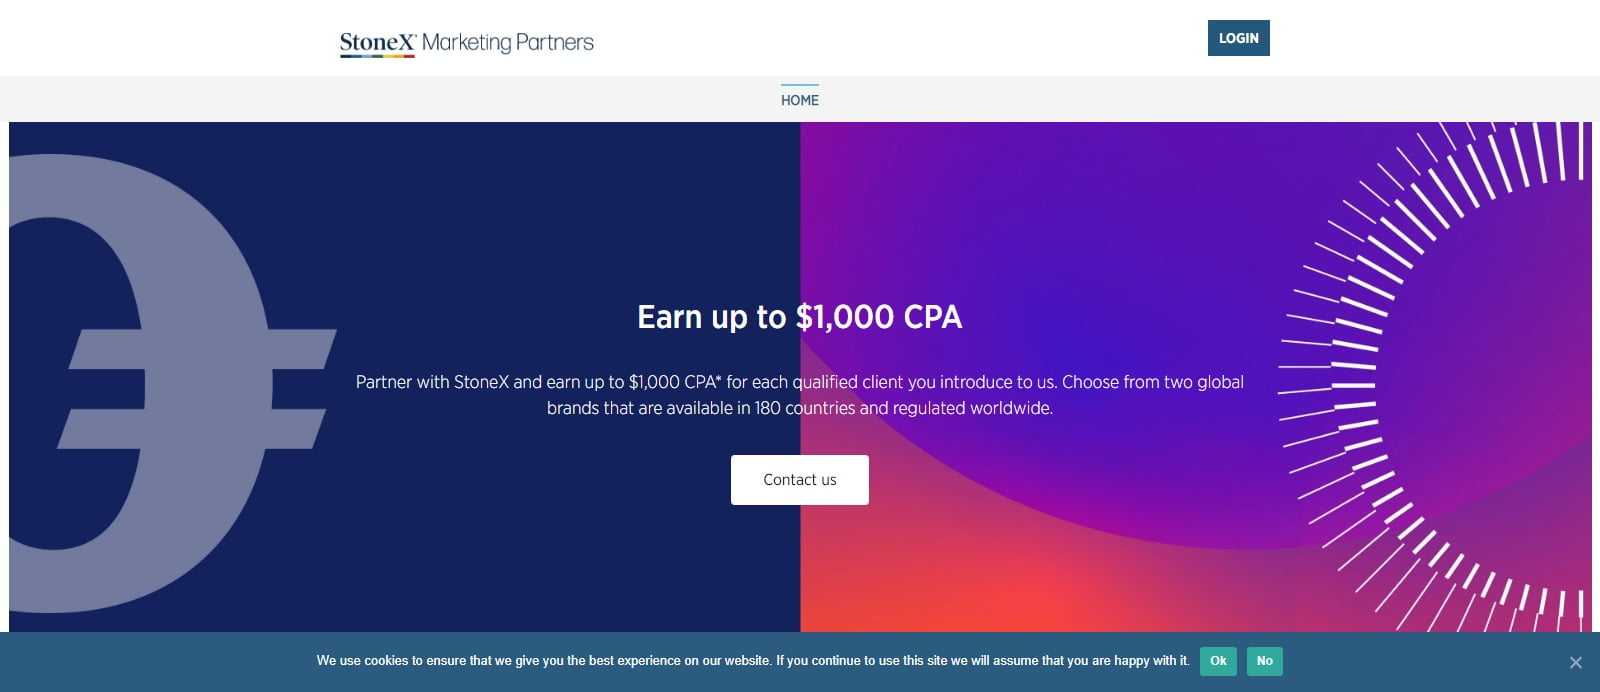 Gain Affiliates Program Review: Earn Up to $650 CPA